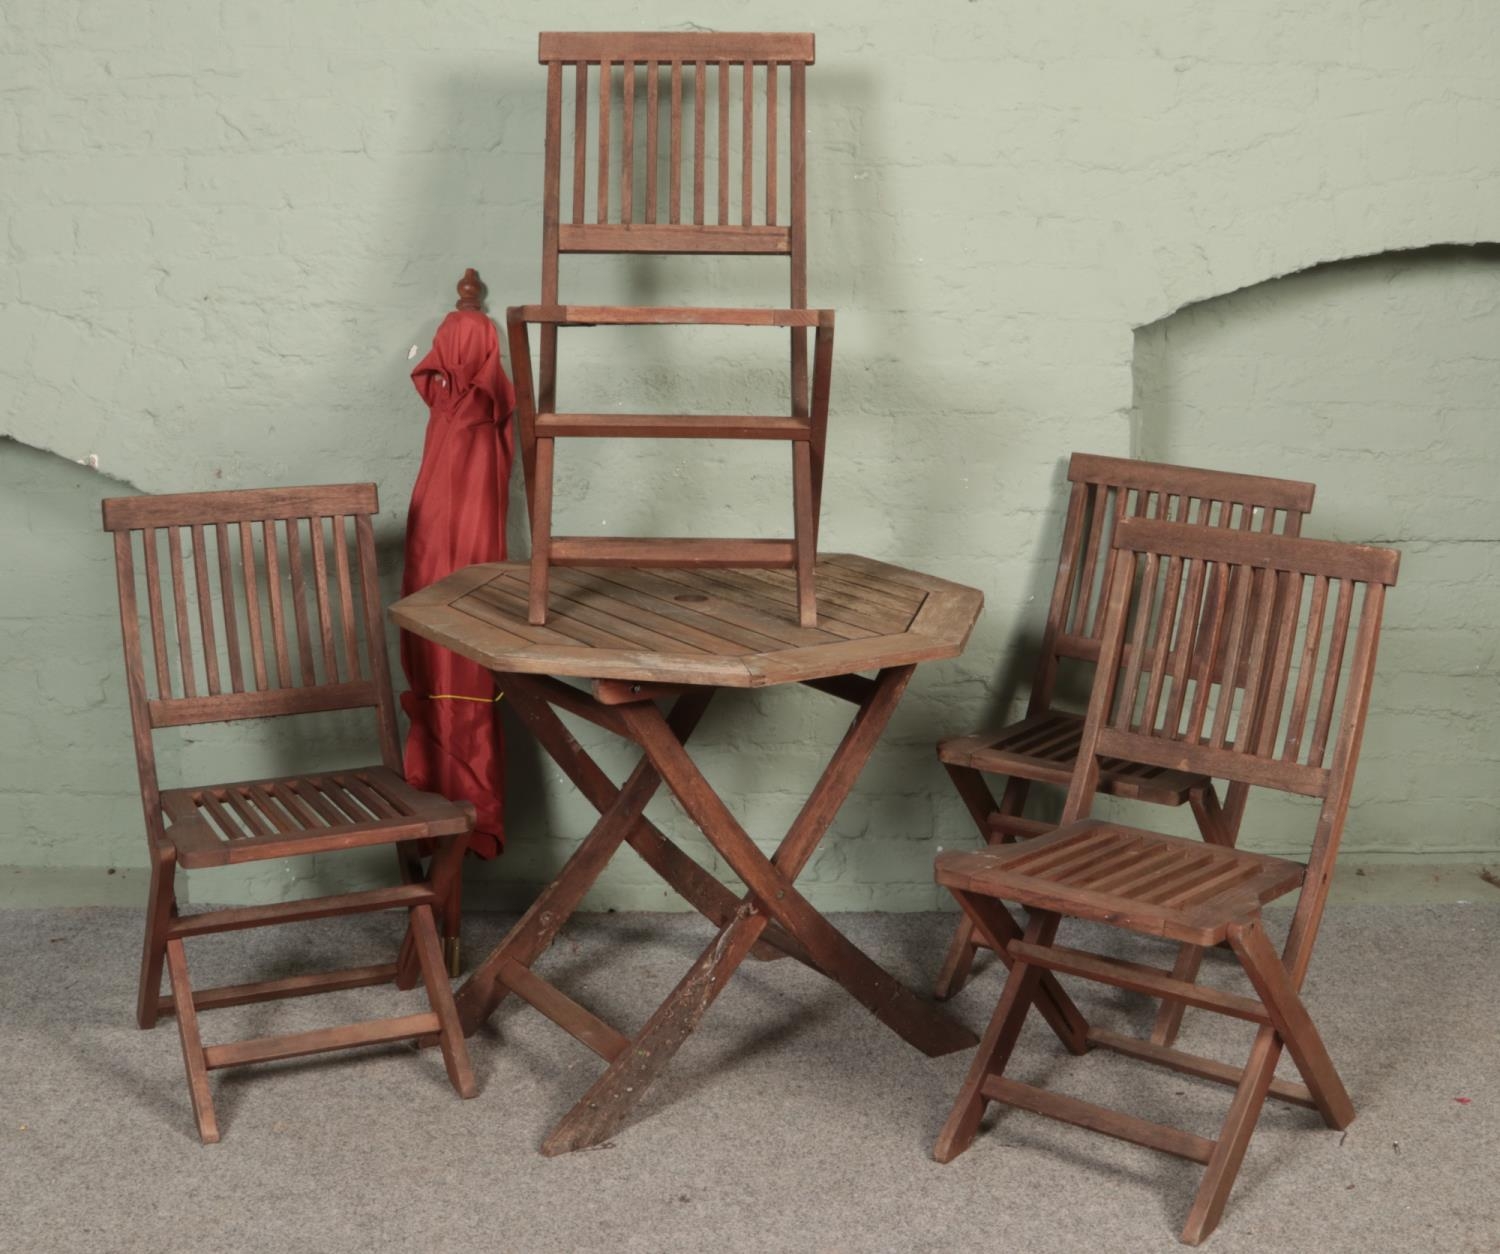 A six piece hardwood garden furniture set. Contains folding table, four chairs and parasol. Some